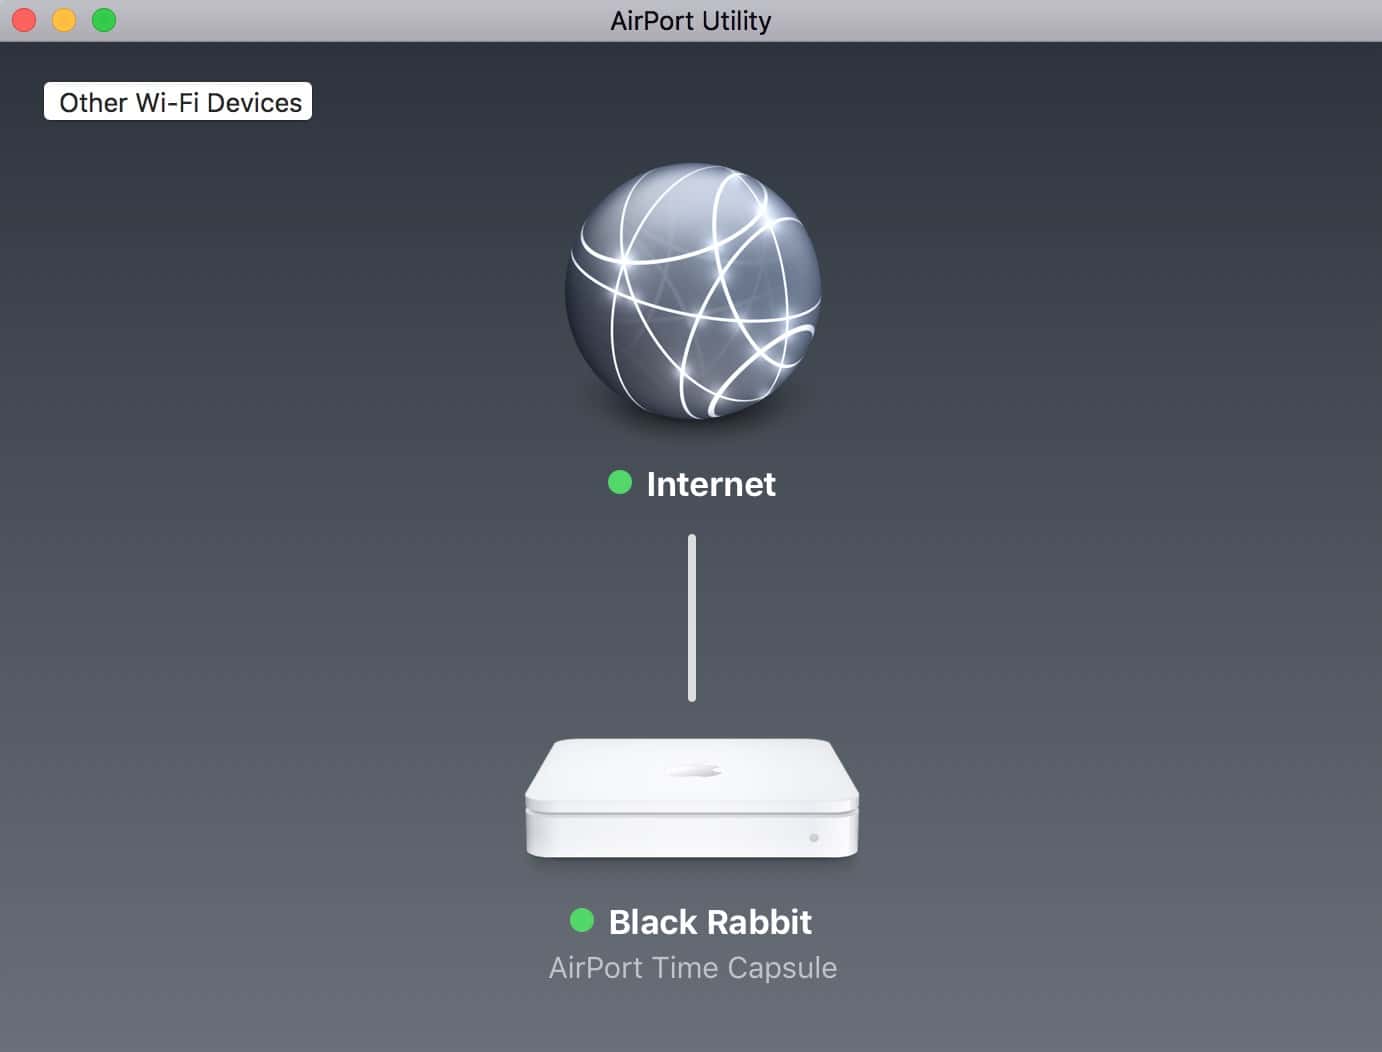 Use the AirPort Utility app on your Mac to see your AirPort Basestation and its settings